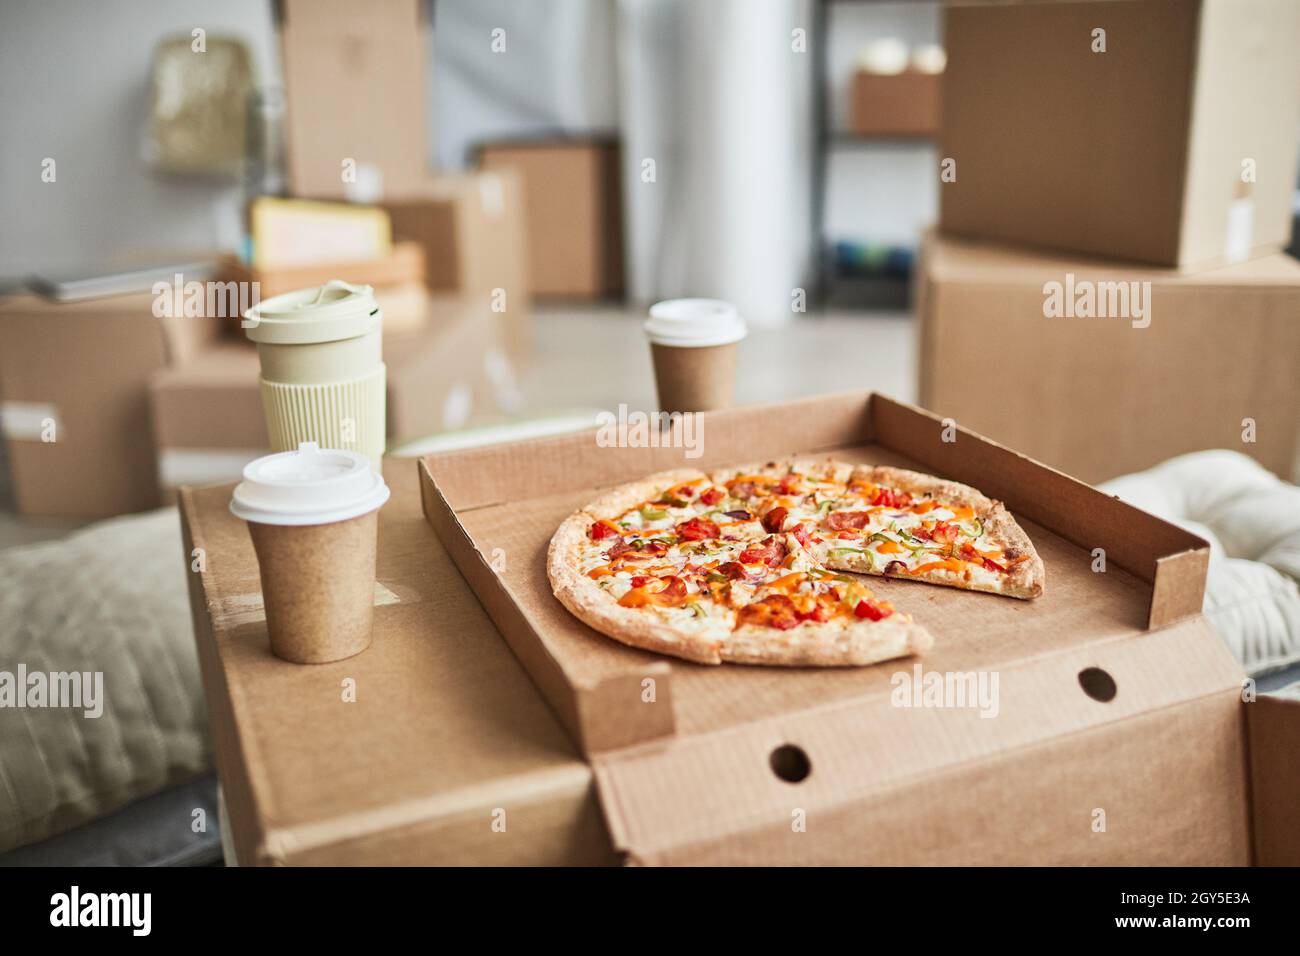 Close up background image of pizza on cardboard box as makeshift table in empty room while family moving in to new house Stock Photo